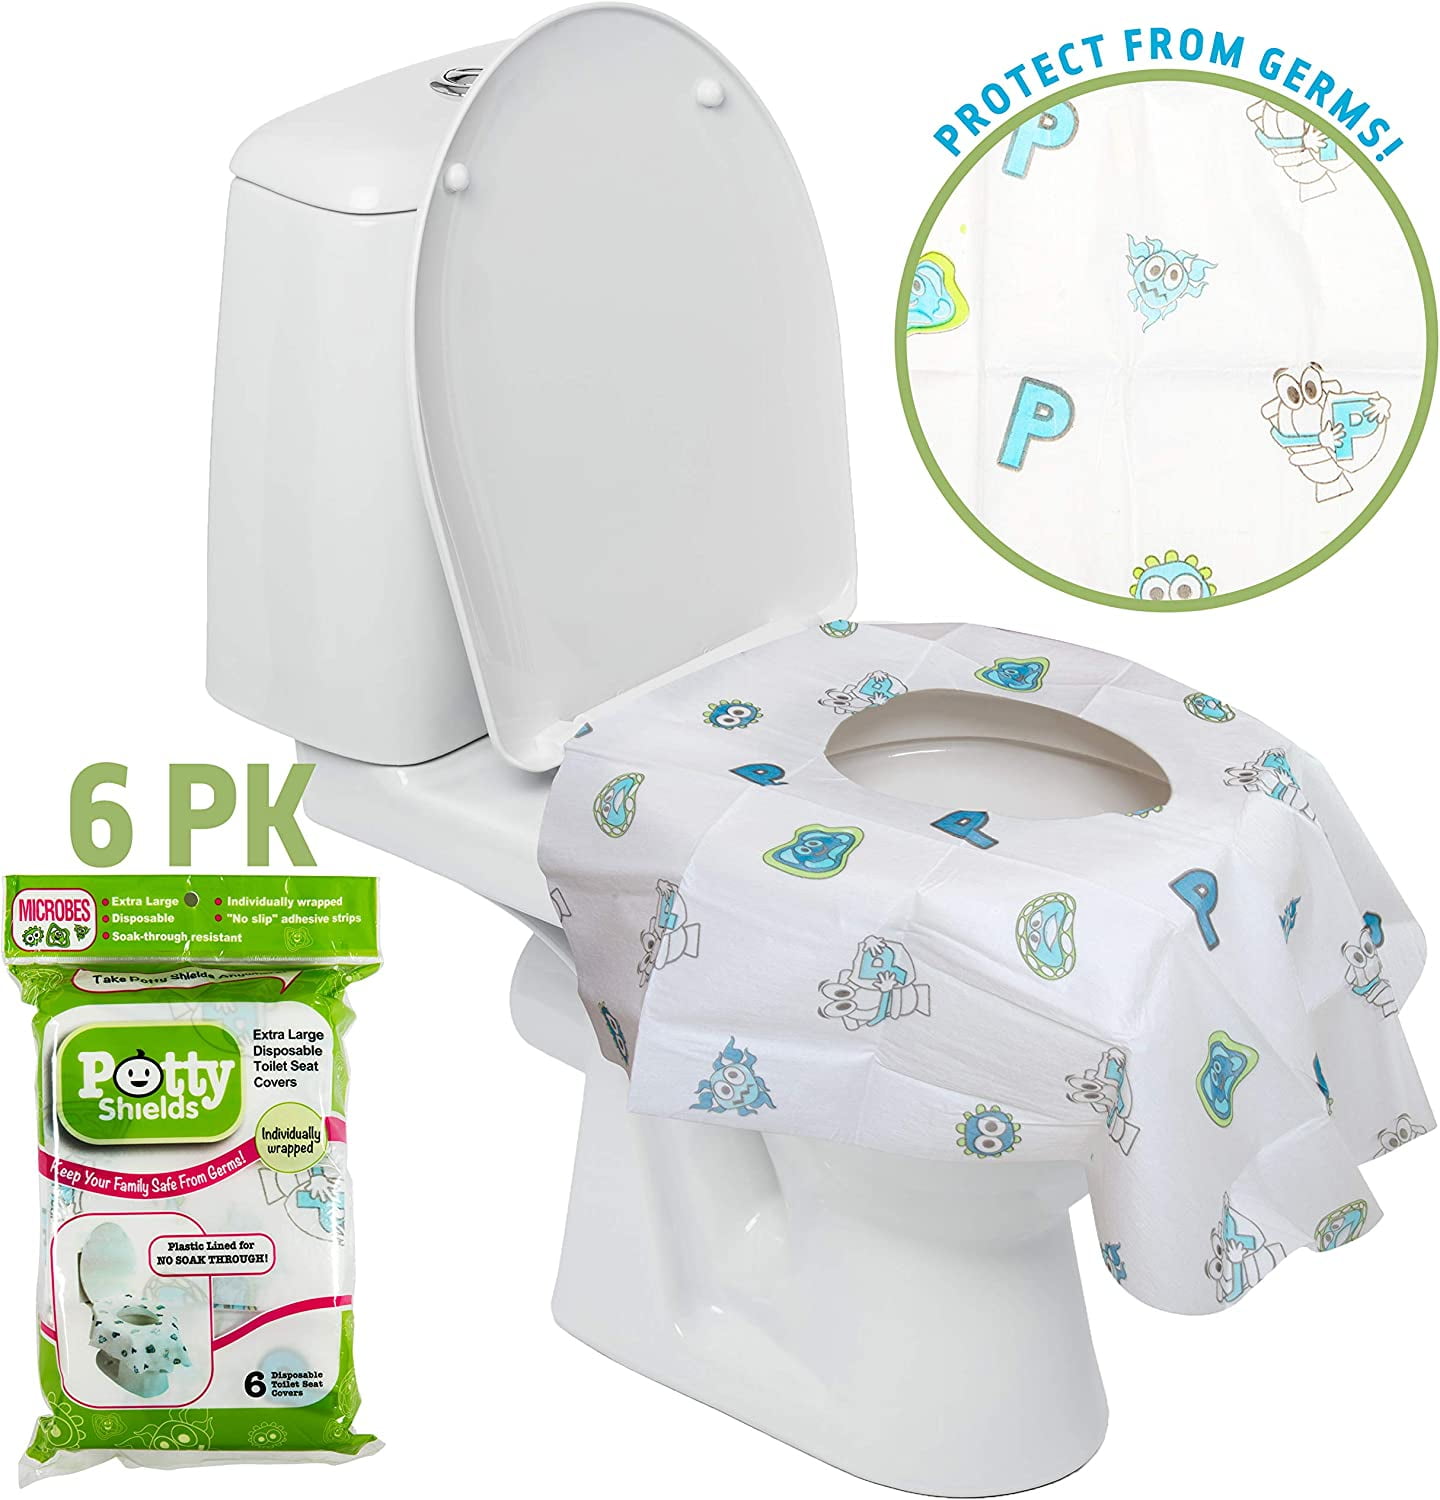 Disposable Hygienic Potty Seat Covers- Individually Wrapped Toilet Seat  Covers by Potty Shields (Set of 6) 